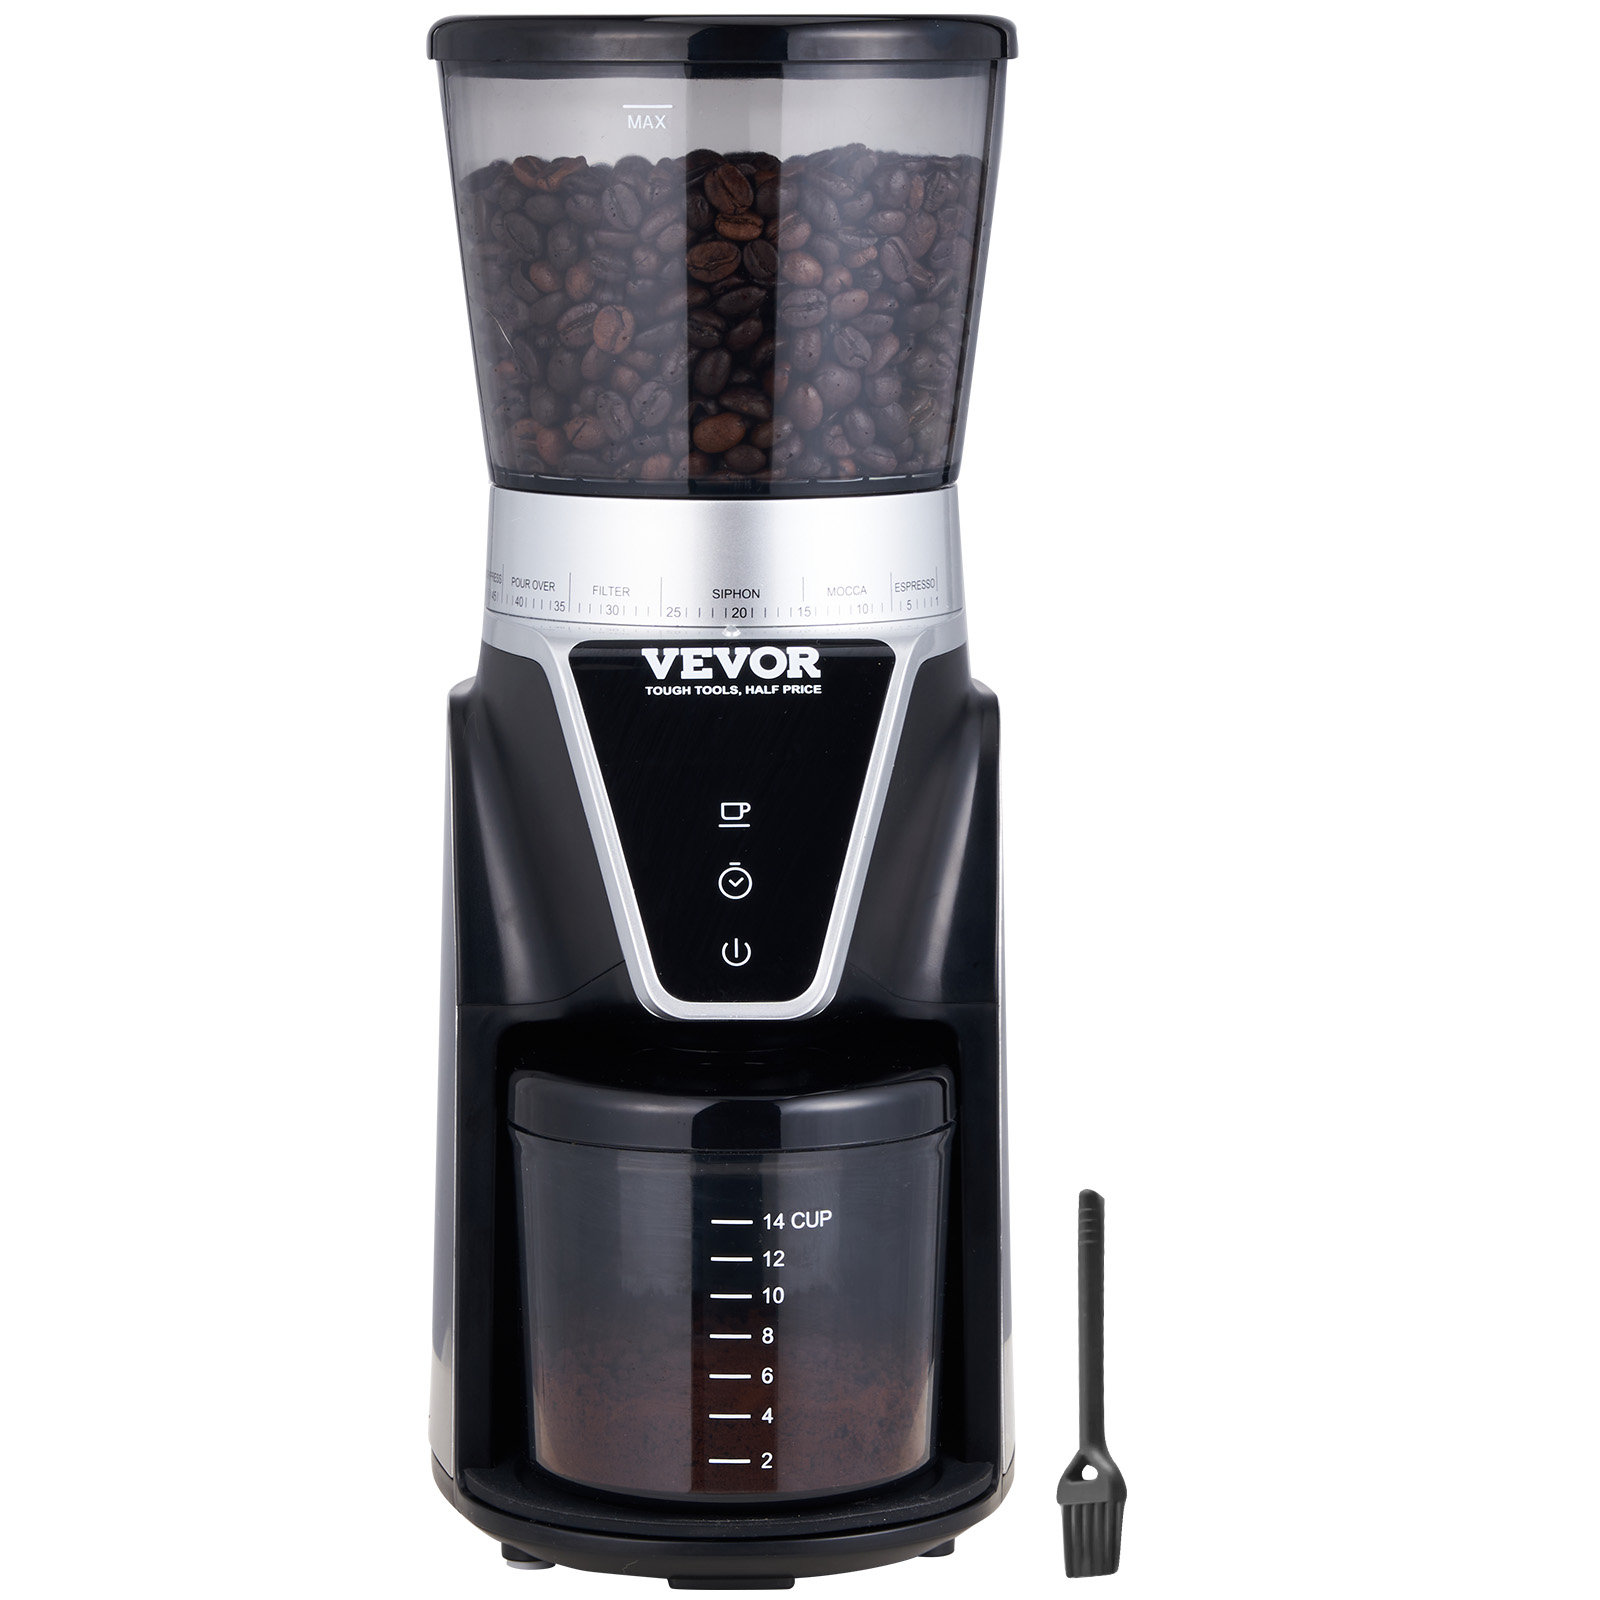 Mr. Coffee Burr Coffee Grinder, Automatic Grinder with 18 Presets